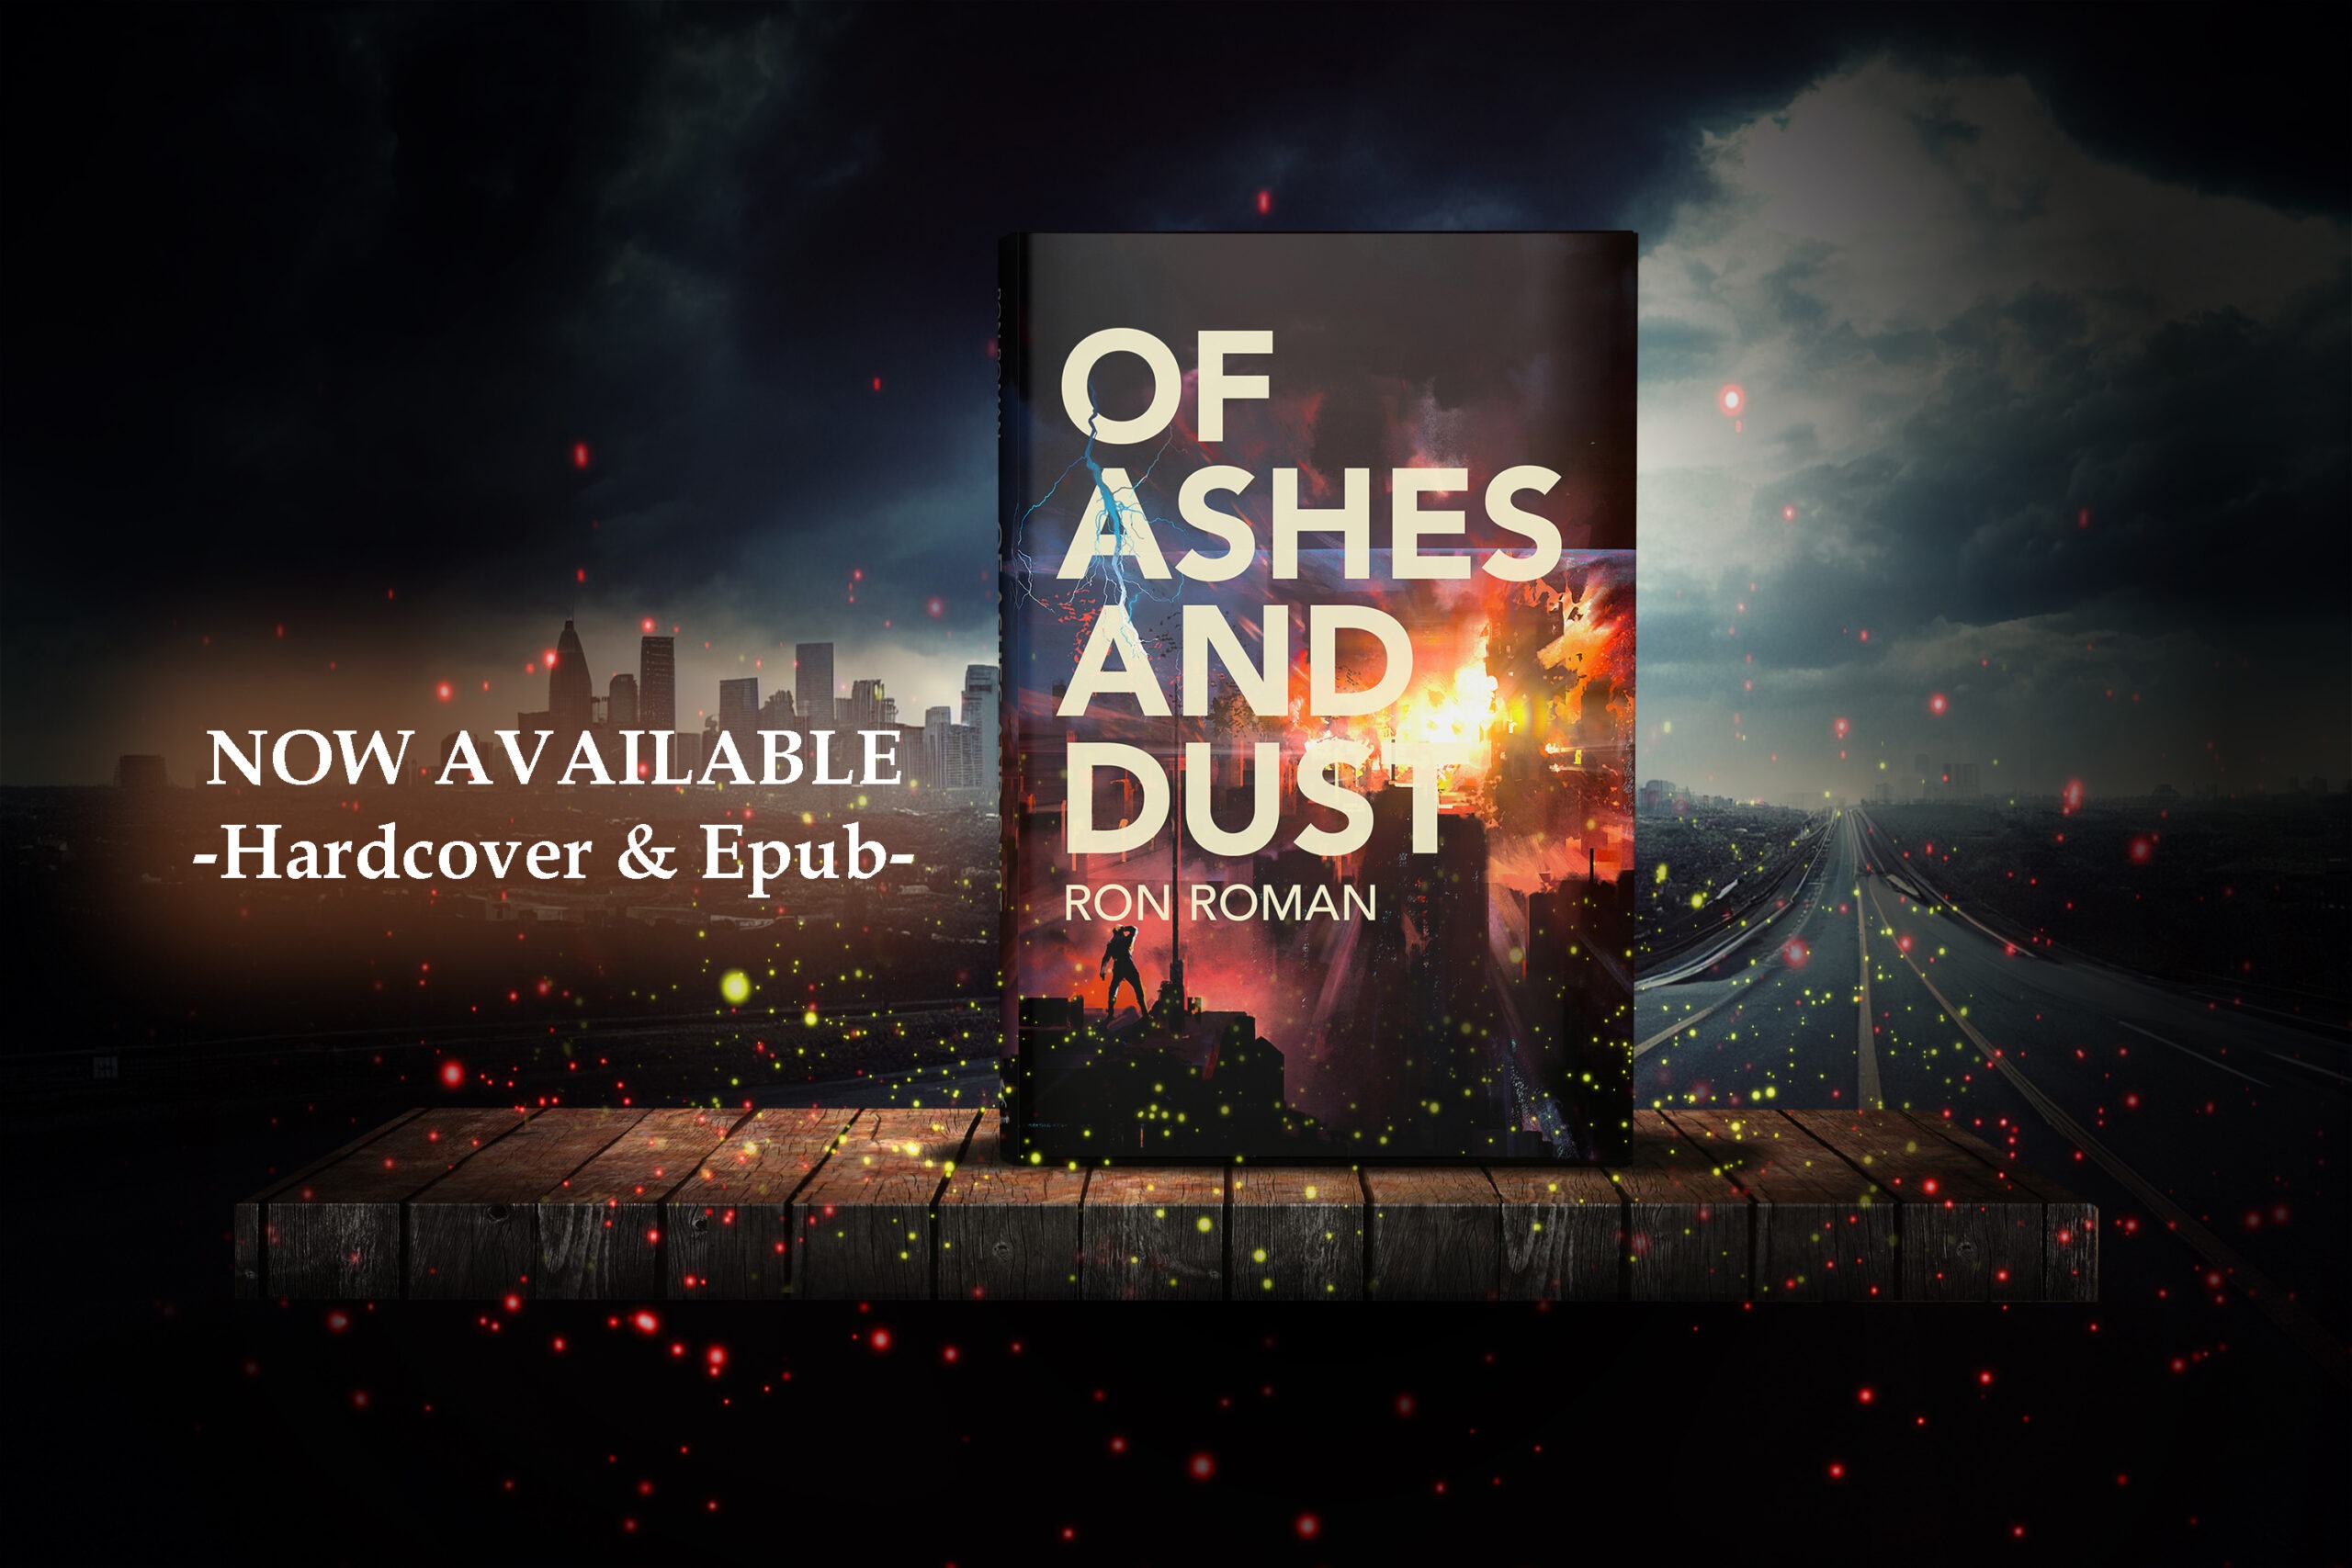 Of Ashes and Dust by Ron Roman now available from Histria Books